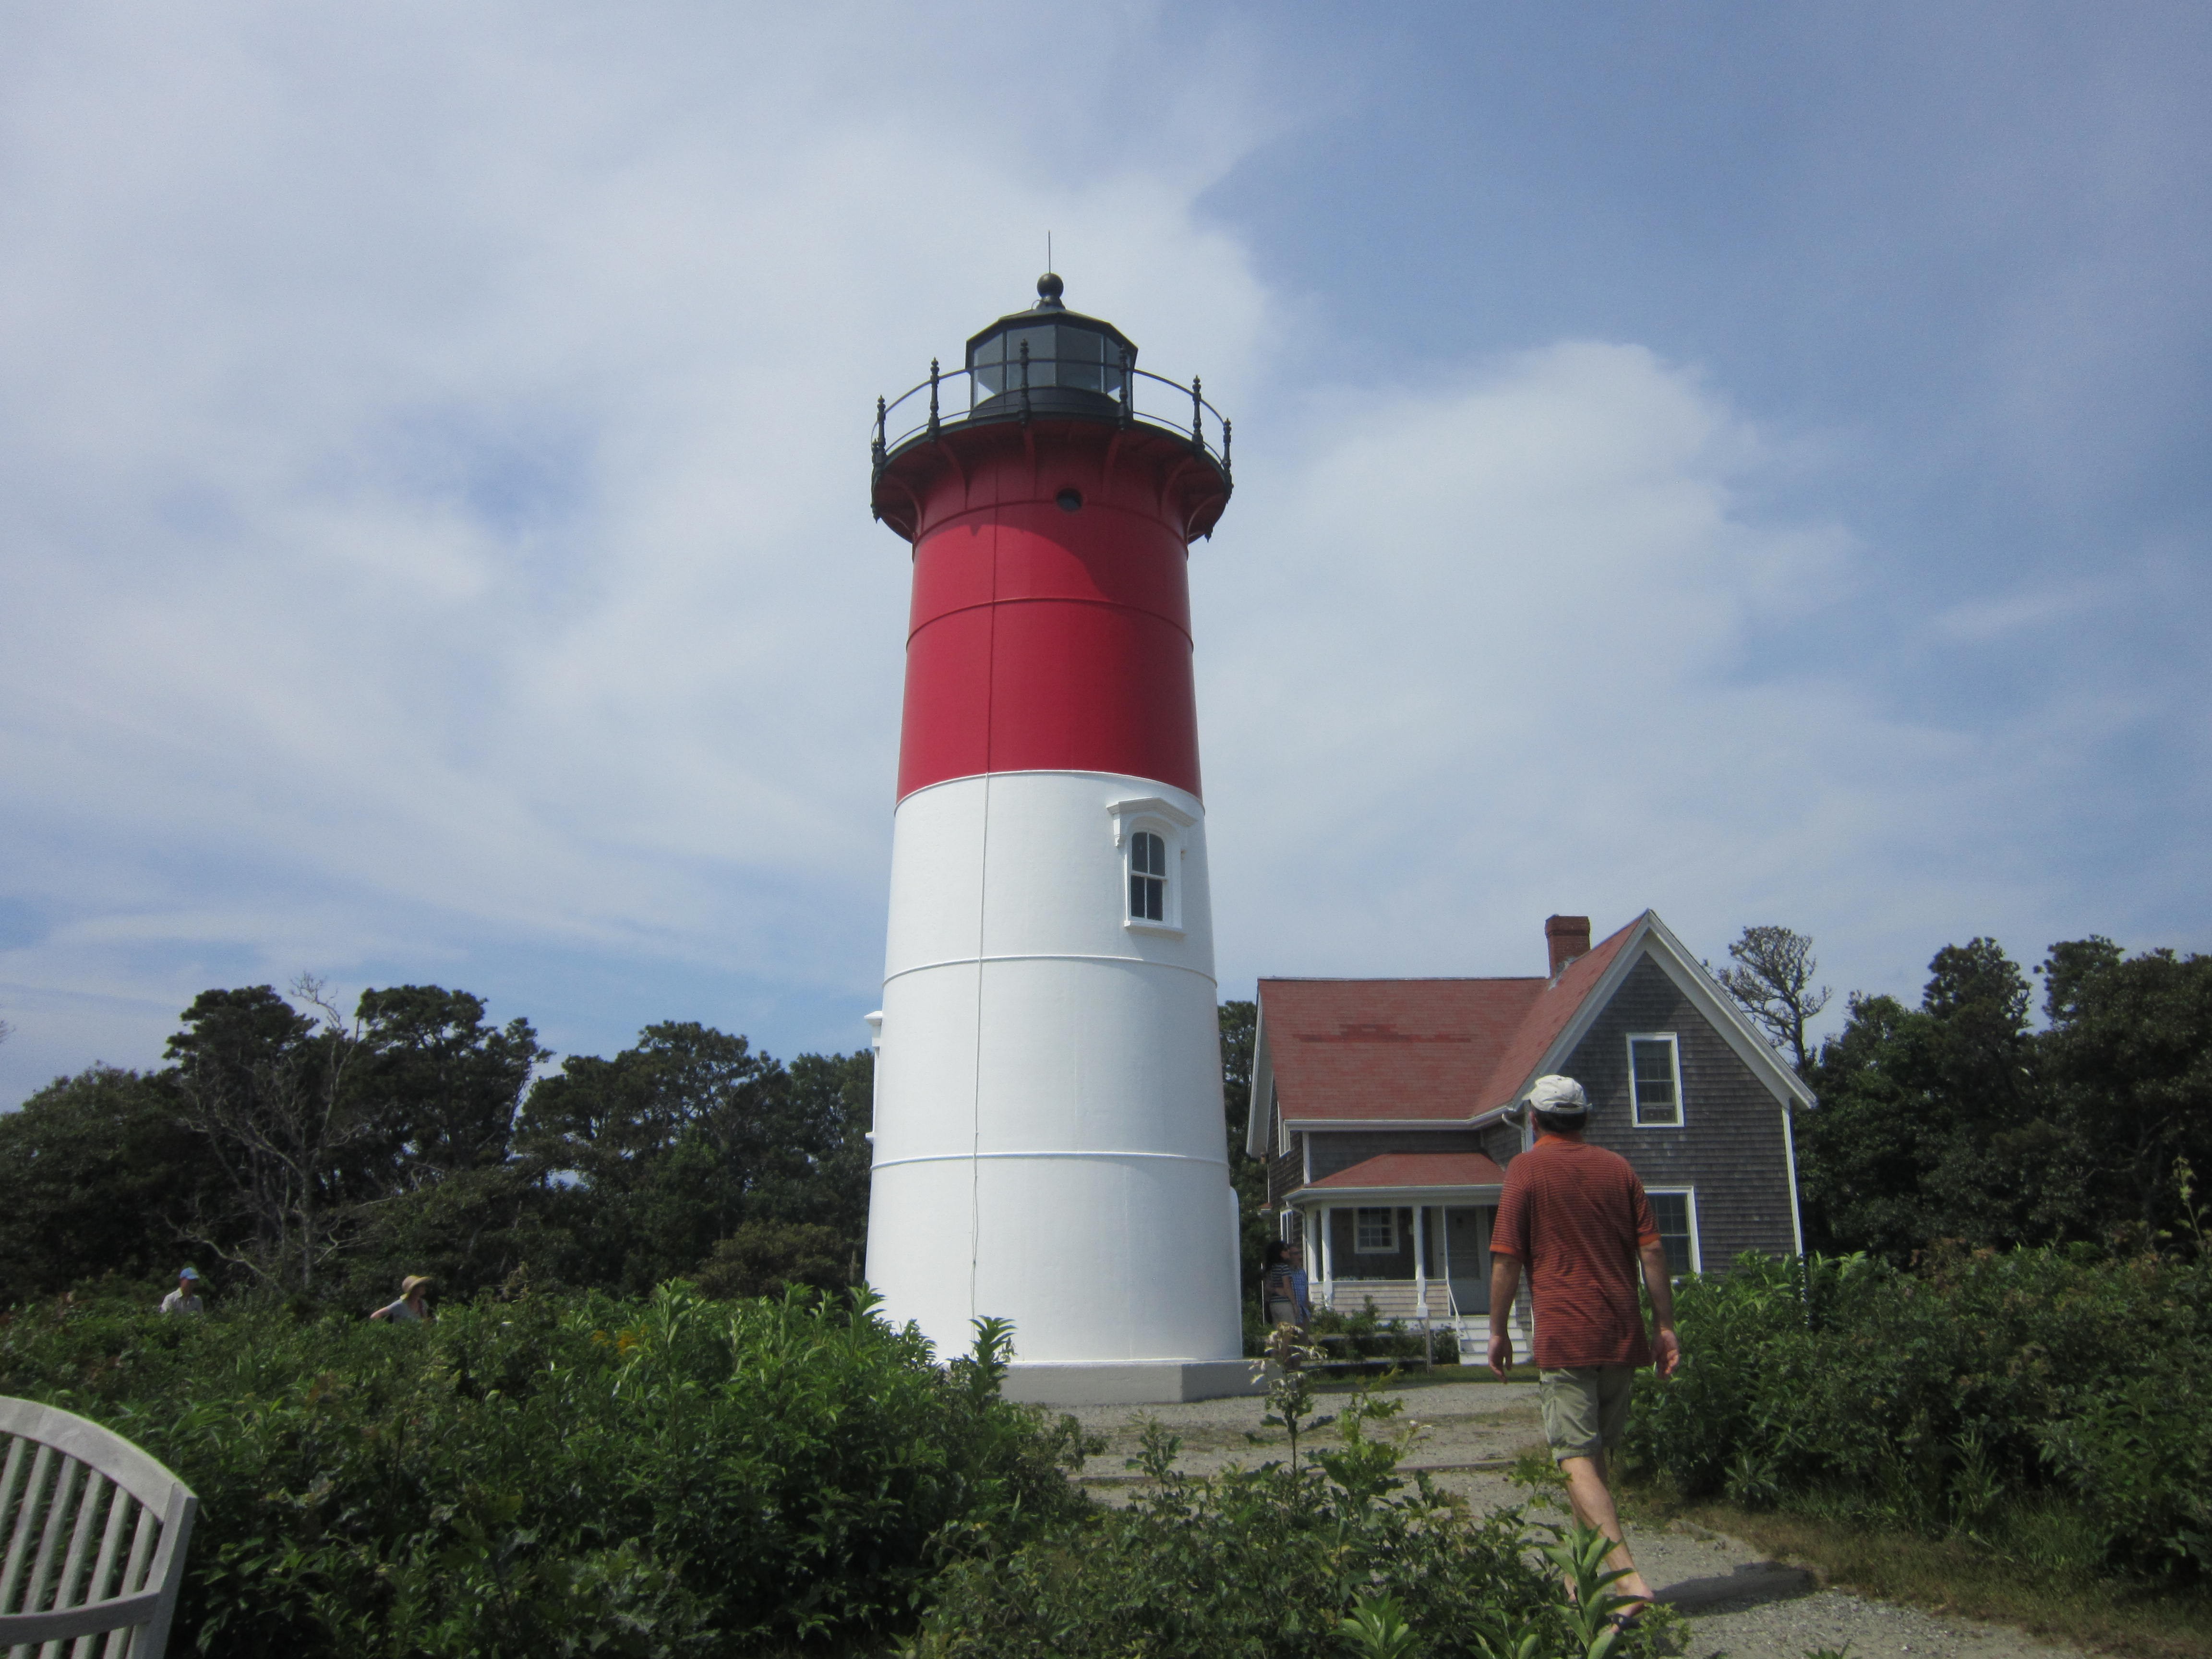 General 4608x3456 lighthouse house outdoors